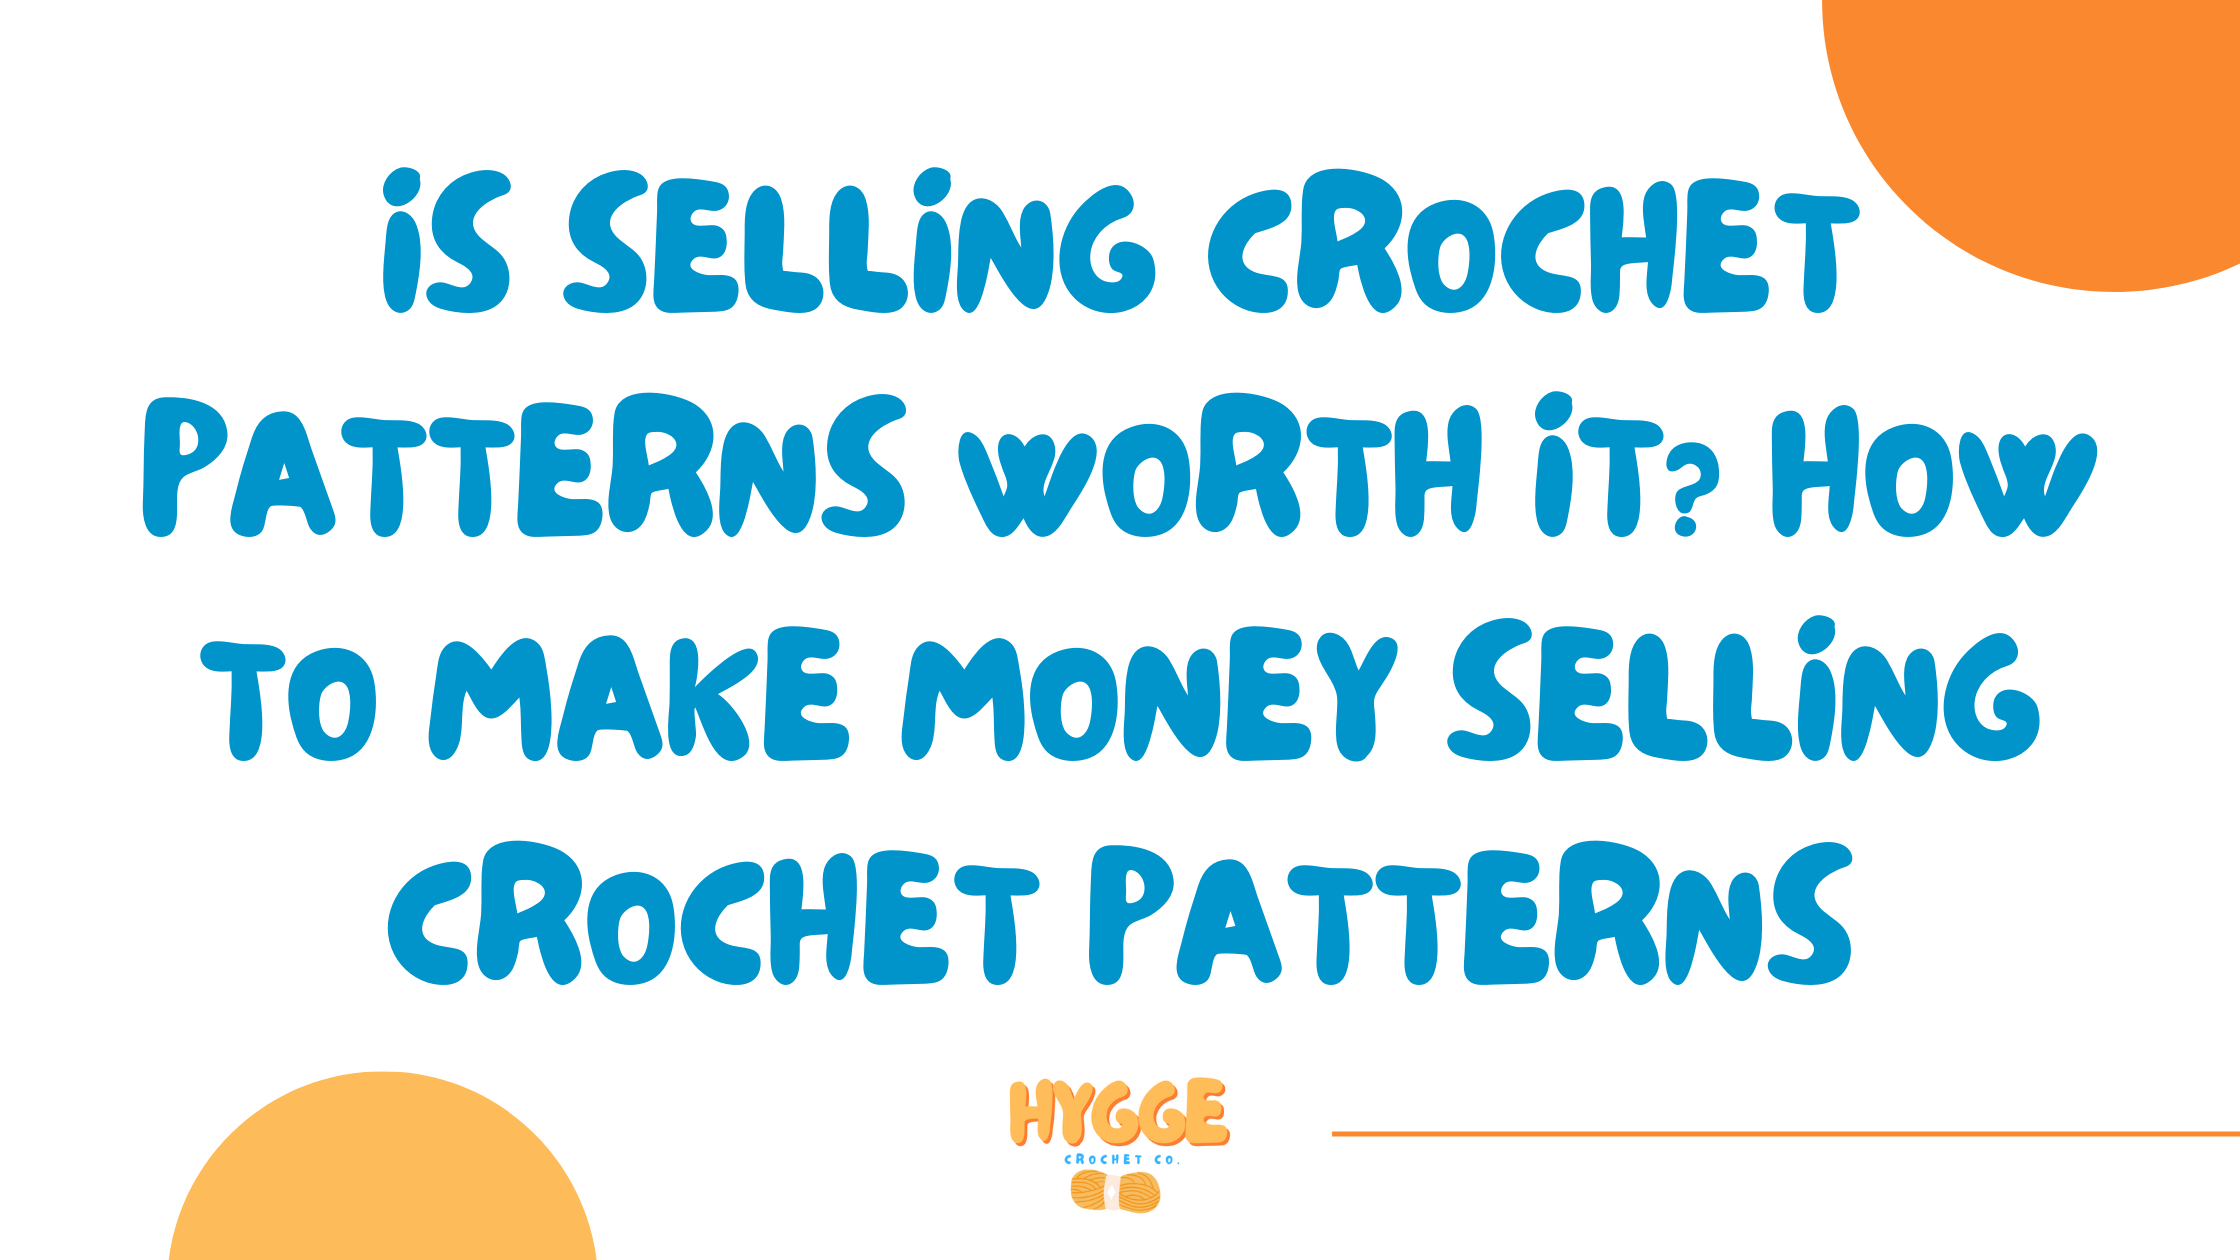 Is Selling Crochet Patterns Worth It? How to Make Money Selling Crochet Patterns